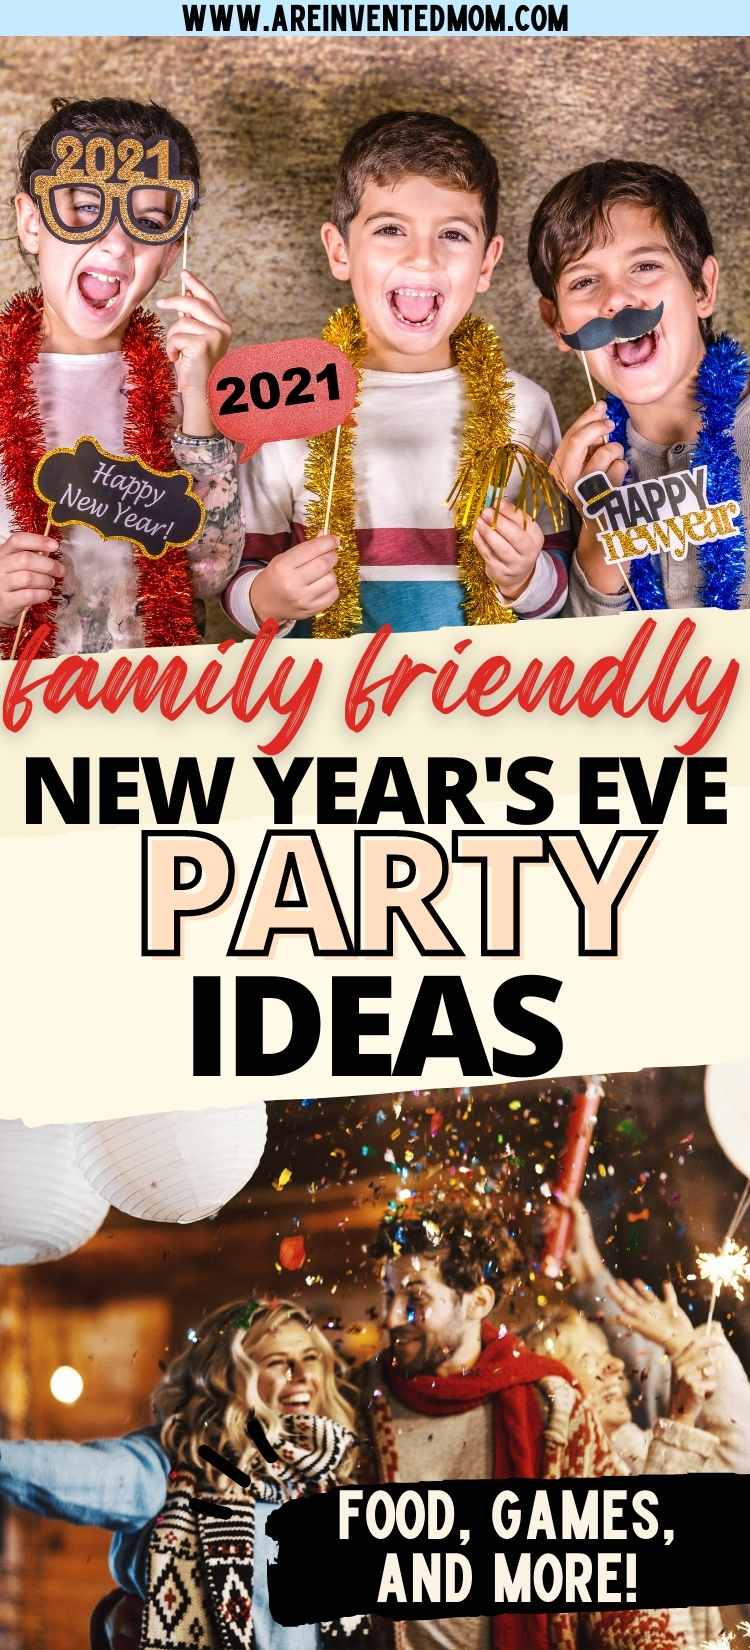 Two image collage of kids and adults celebrating a friendly new years eve party with text overlay.